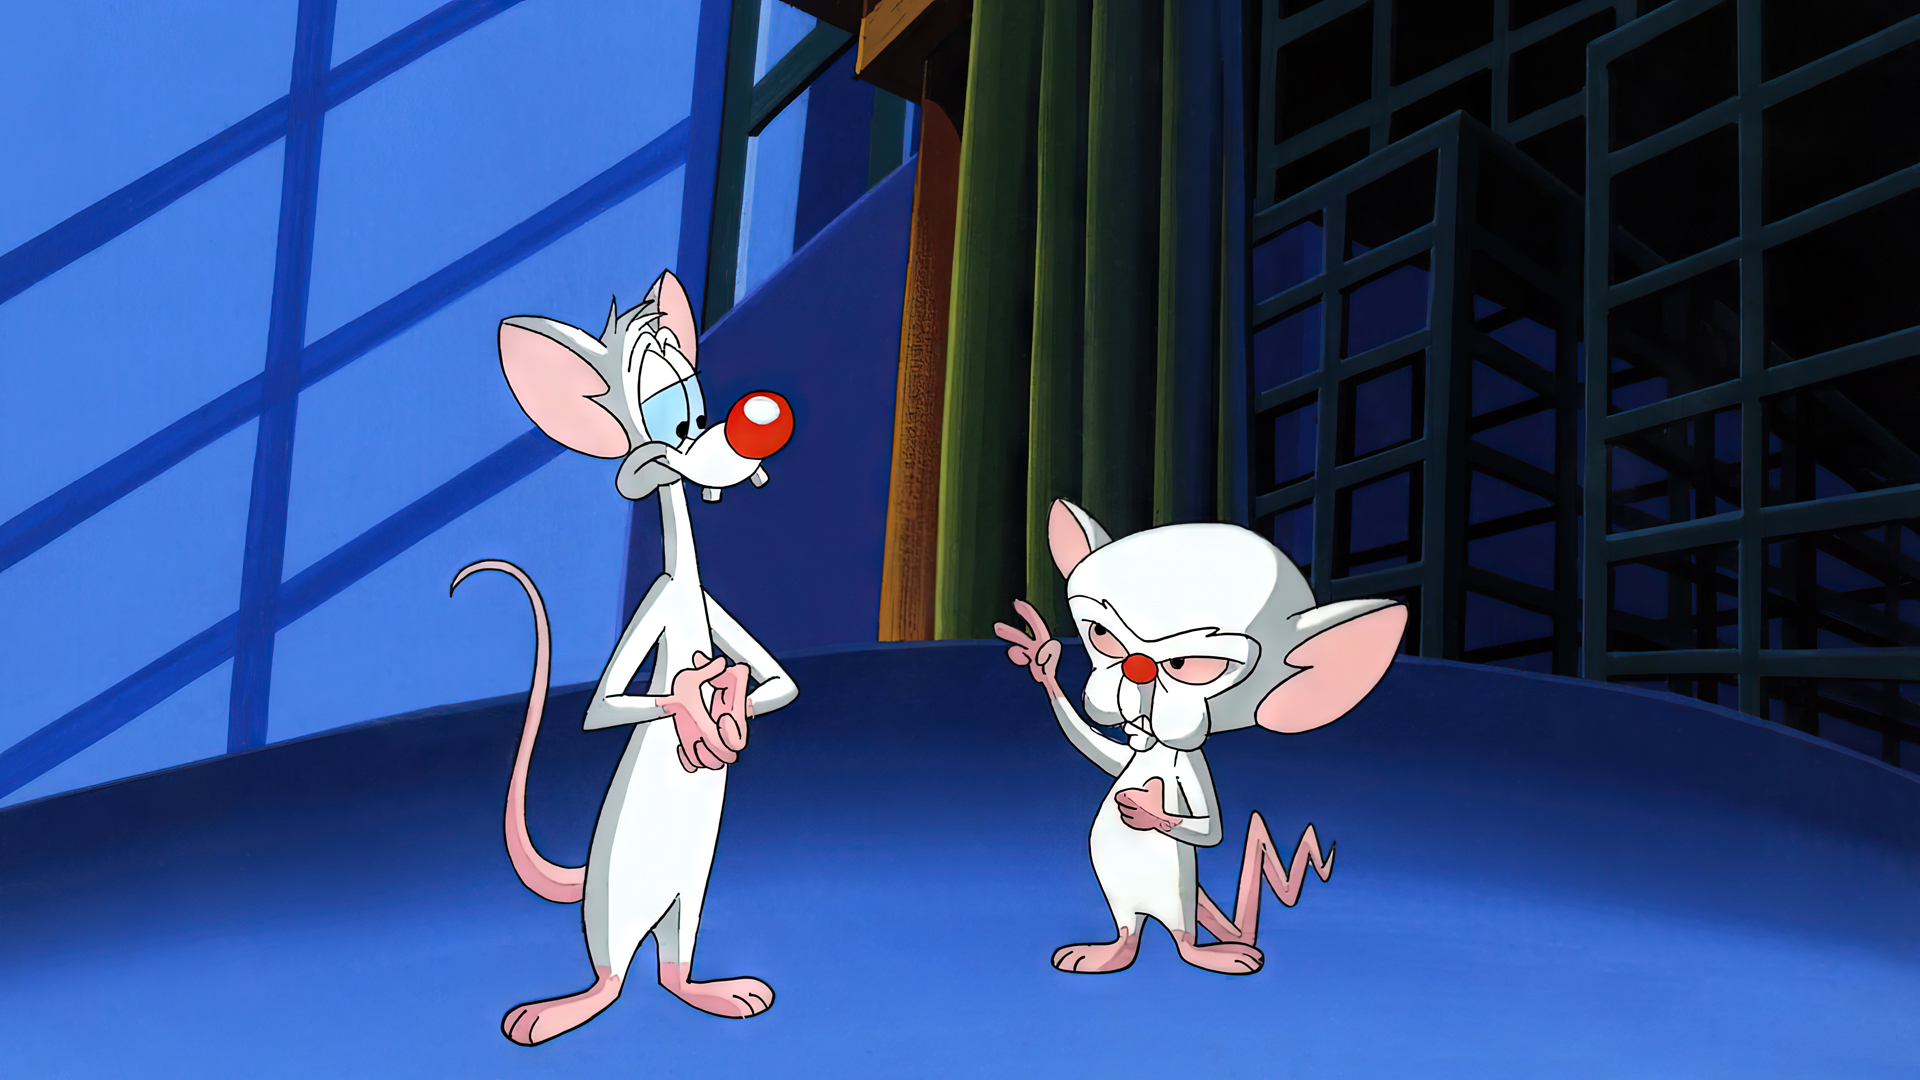 General 1920x1080 Pinky and the Brain animation cartoon animated series production cel mice Warner Brothers